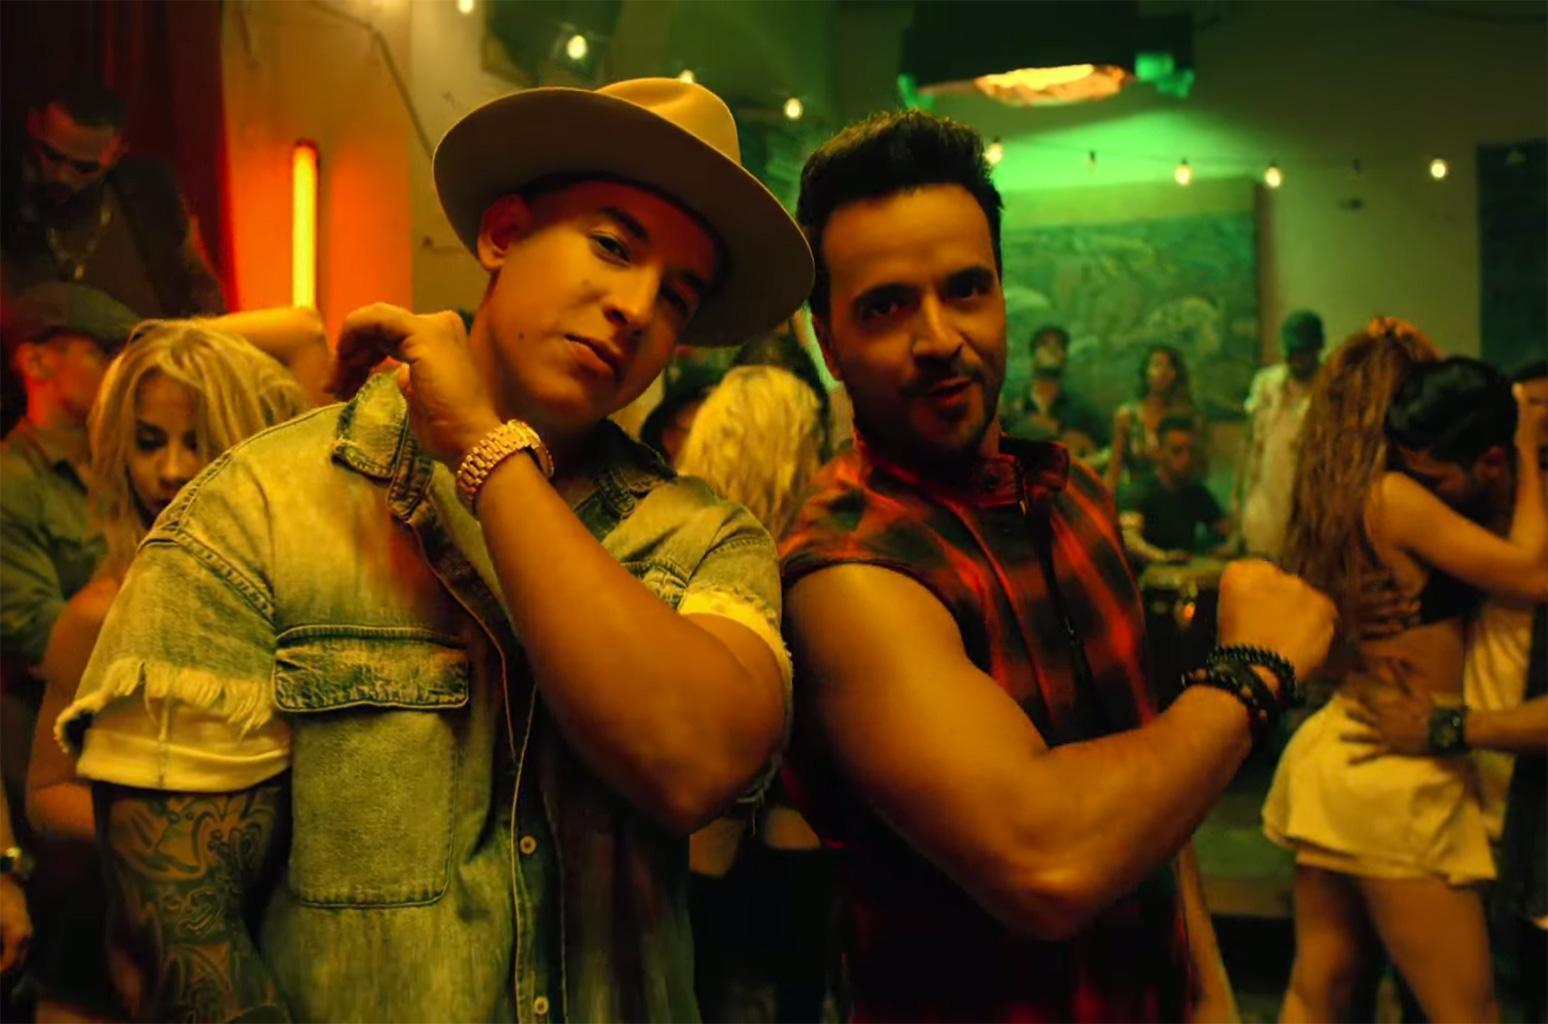 The title of the song by Daddy Yankee (left) and Luis Fonsi translates to ‘Slowly’